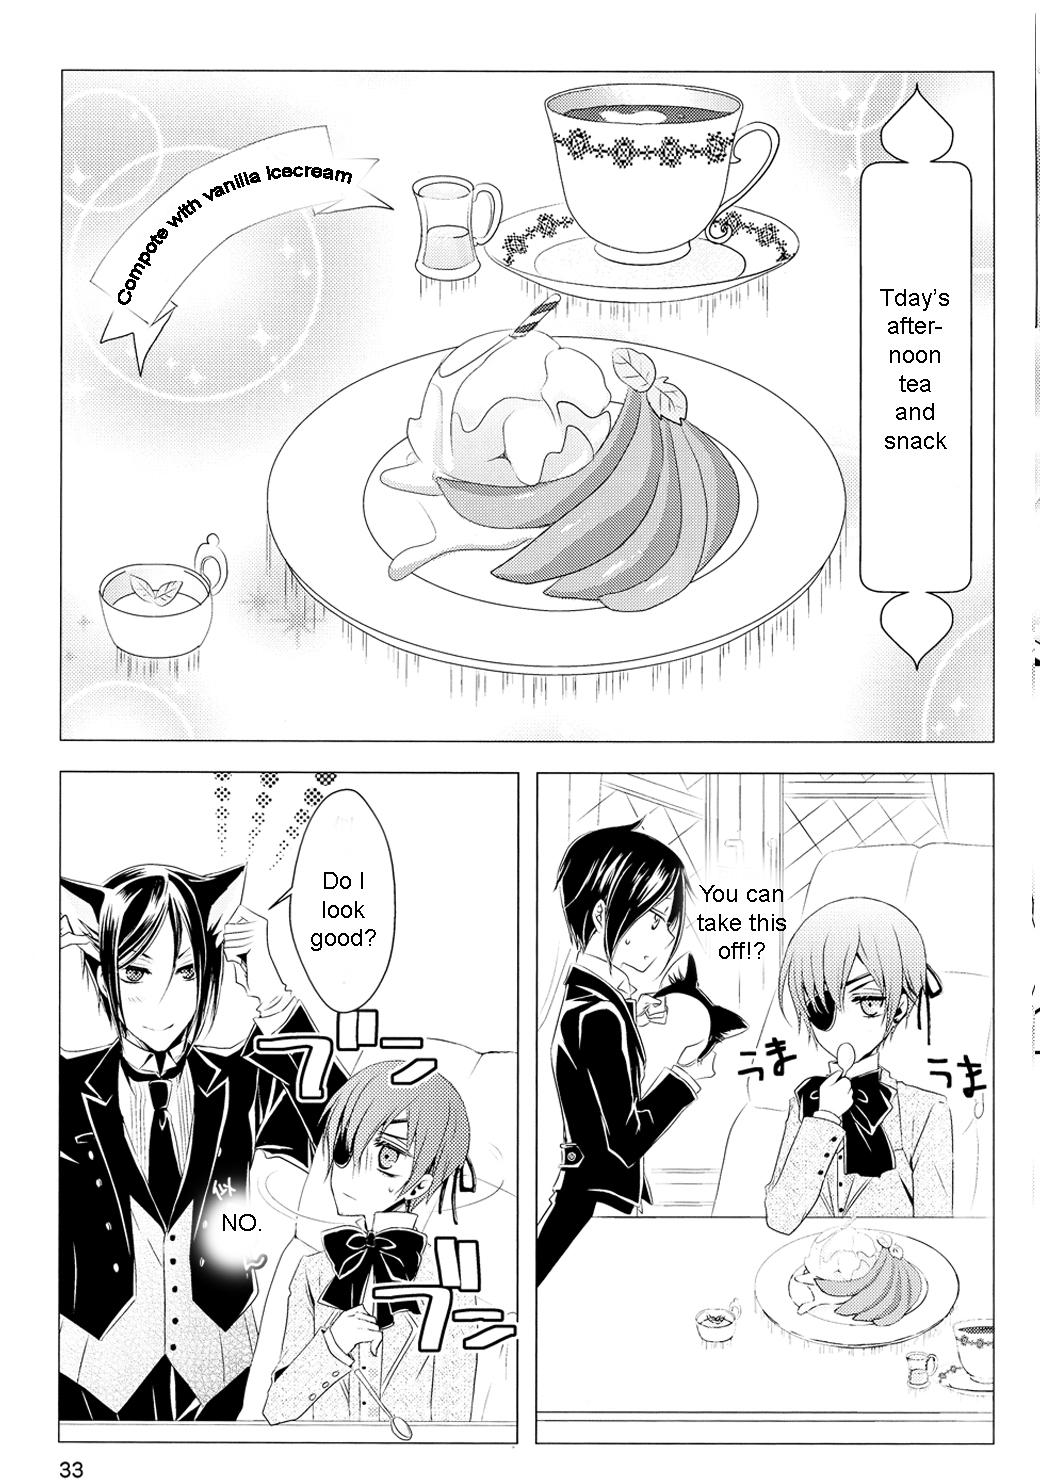 Naturaltits Shiyounin to Inu - Black butler Ink - Page 34